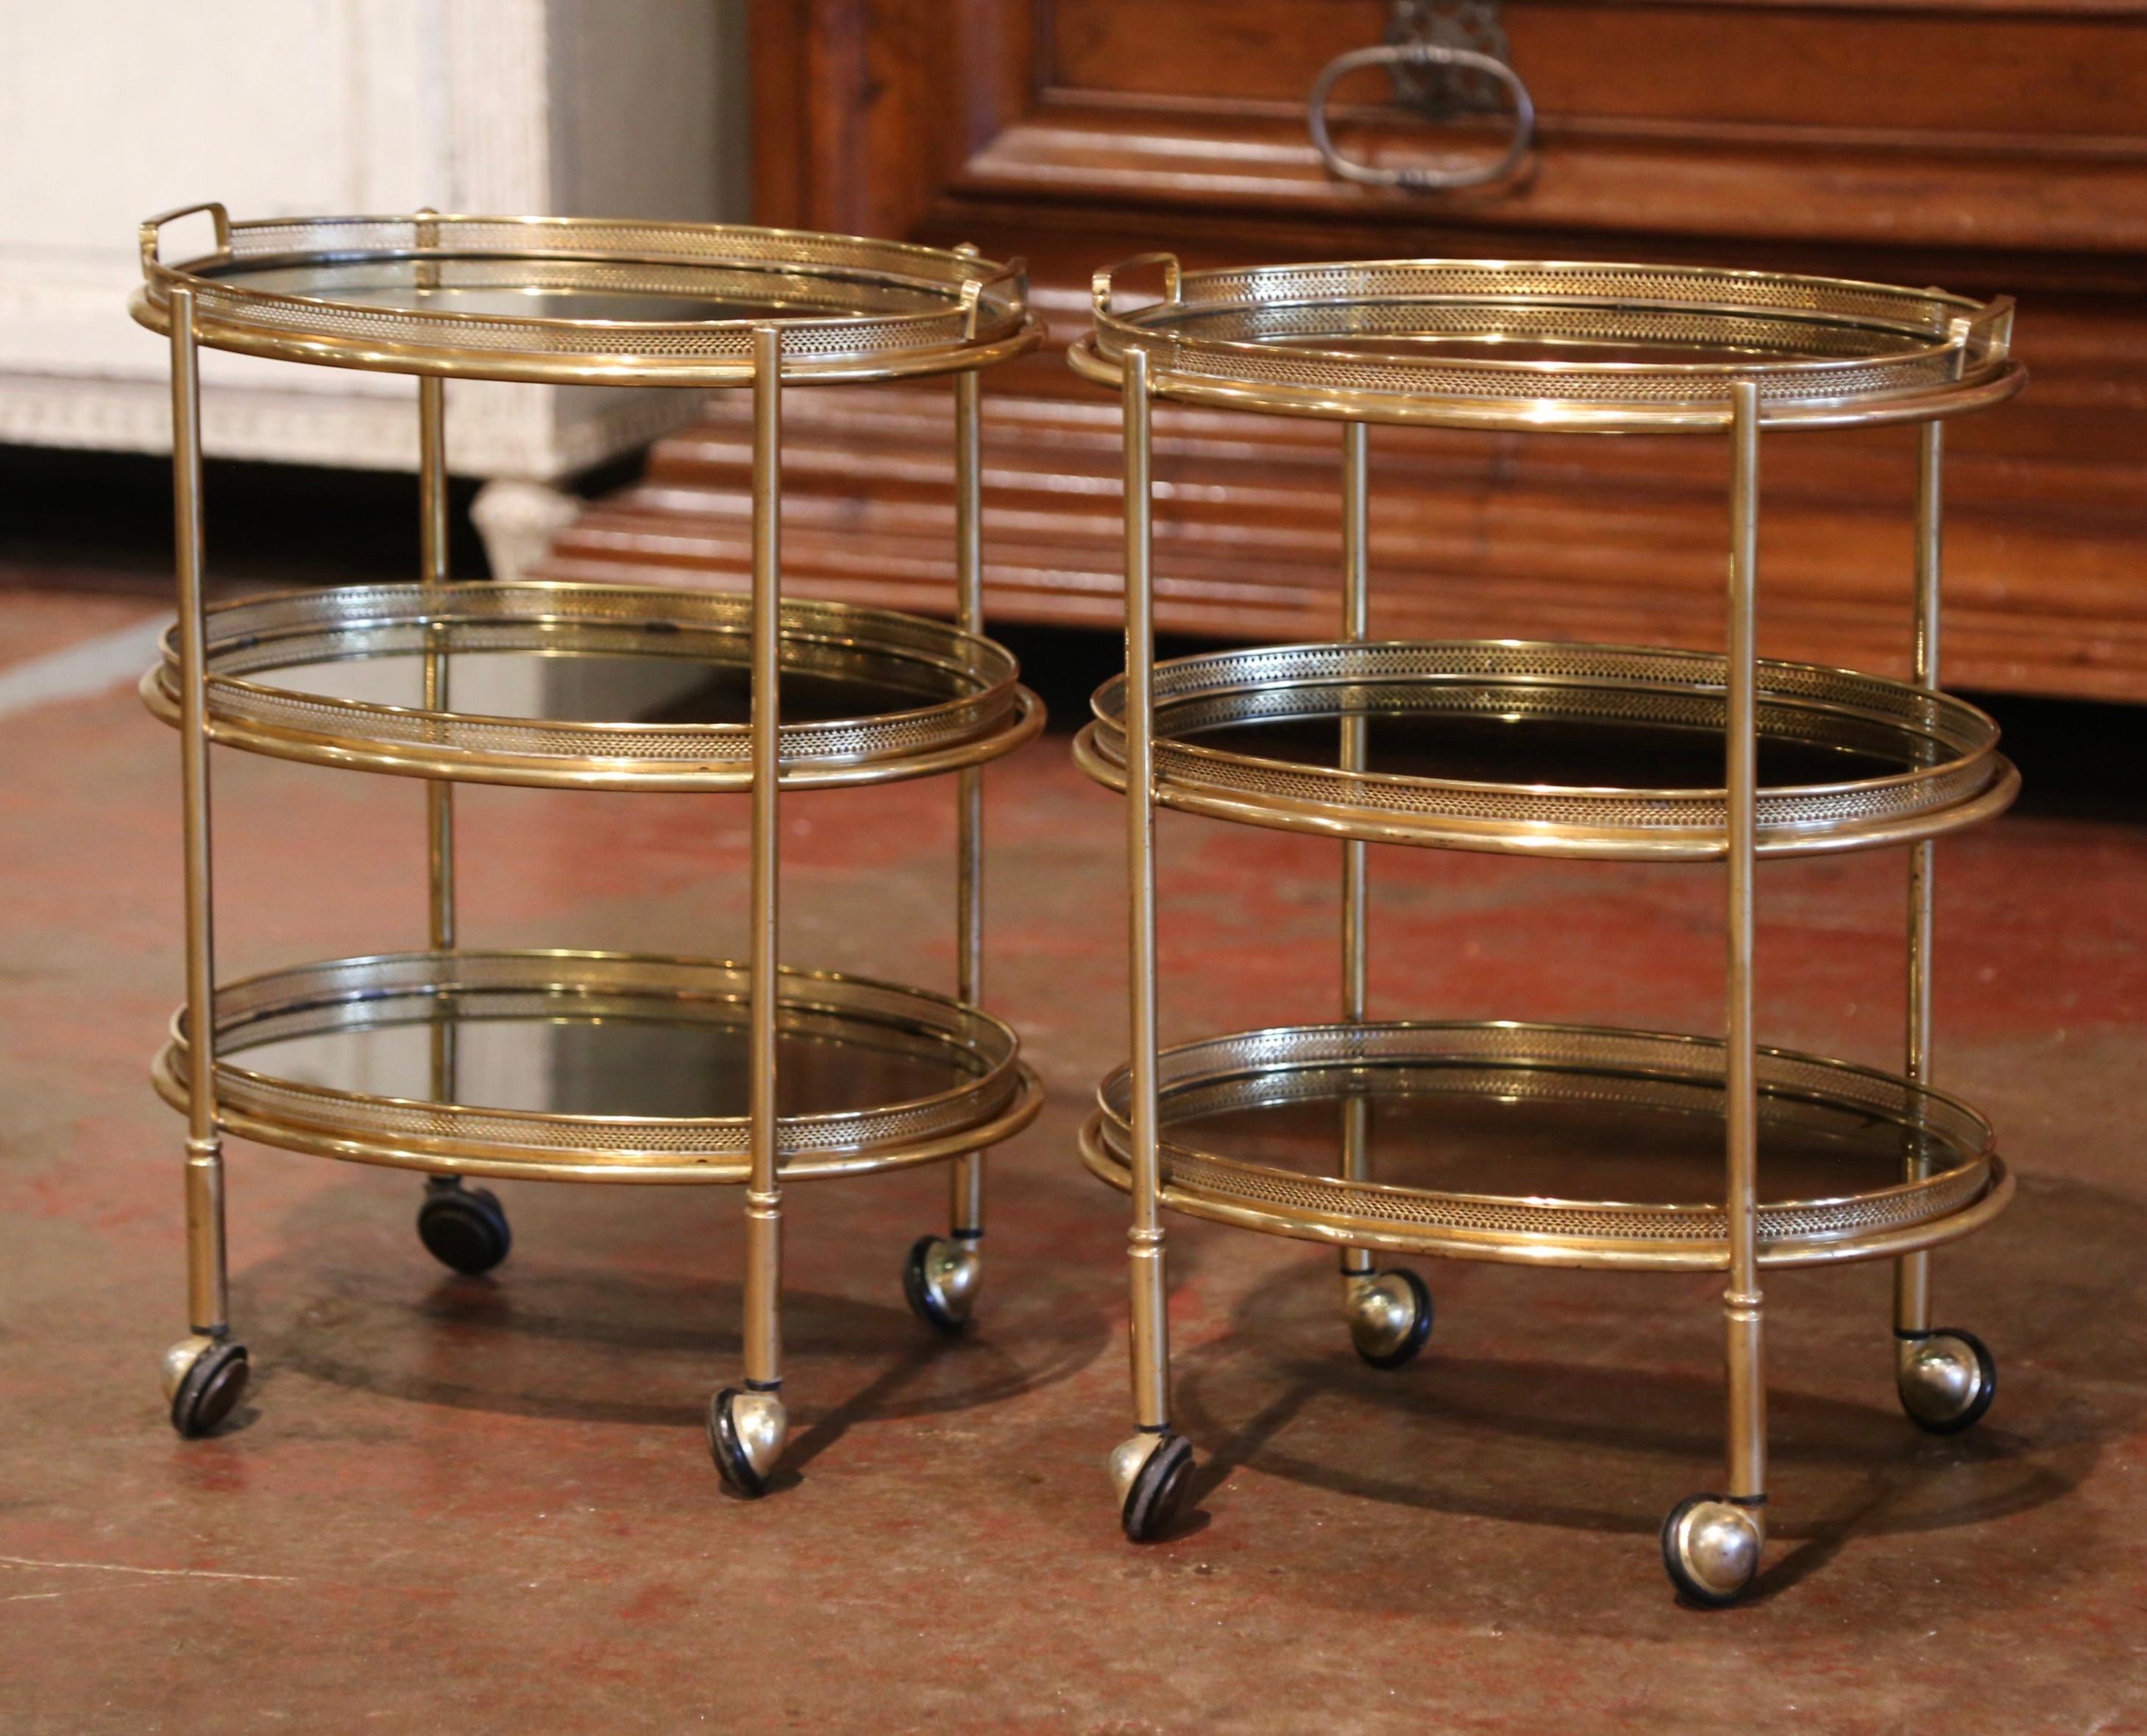 These elegant vintage trolleys bar carts on casters, were created in France, circa 1950. Built in brass and oval in shape, each table stands on small round wheels, over three removable plateaus topped with smoked glass surfaces. The top deck is